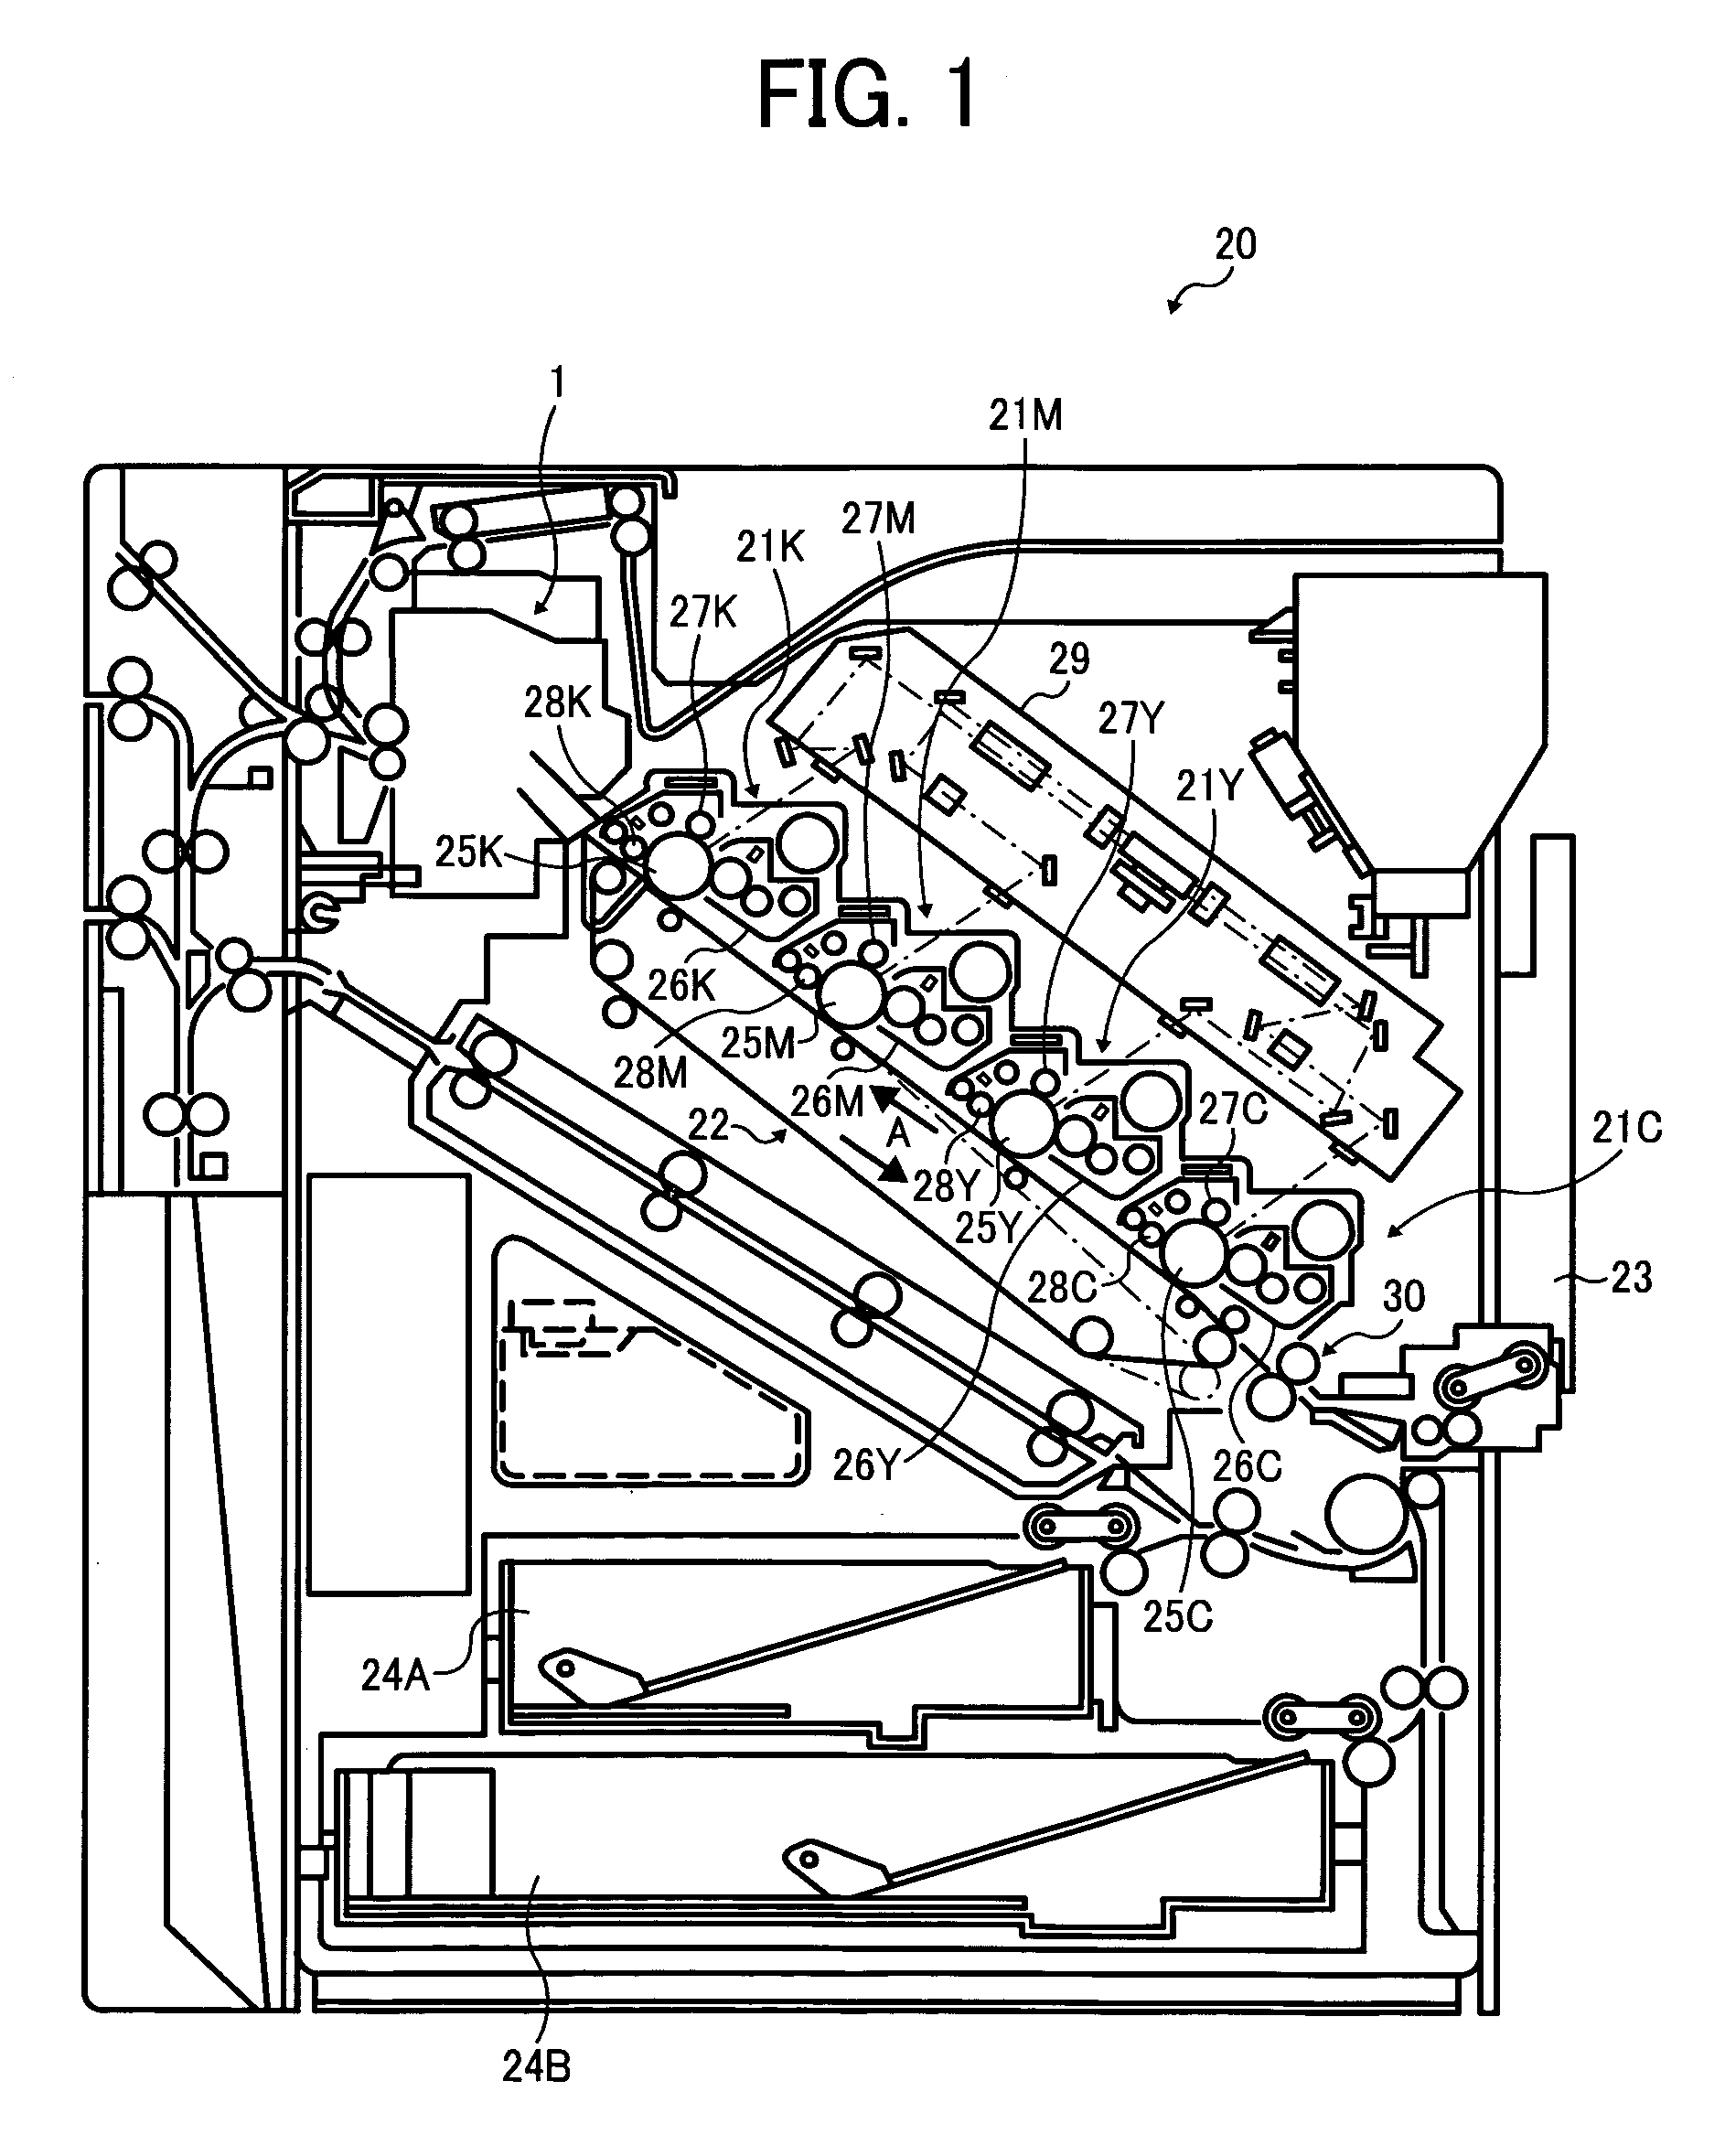 Fixing device, image forming apparatus including the fixing device, and fixing method